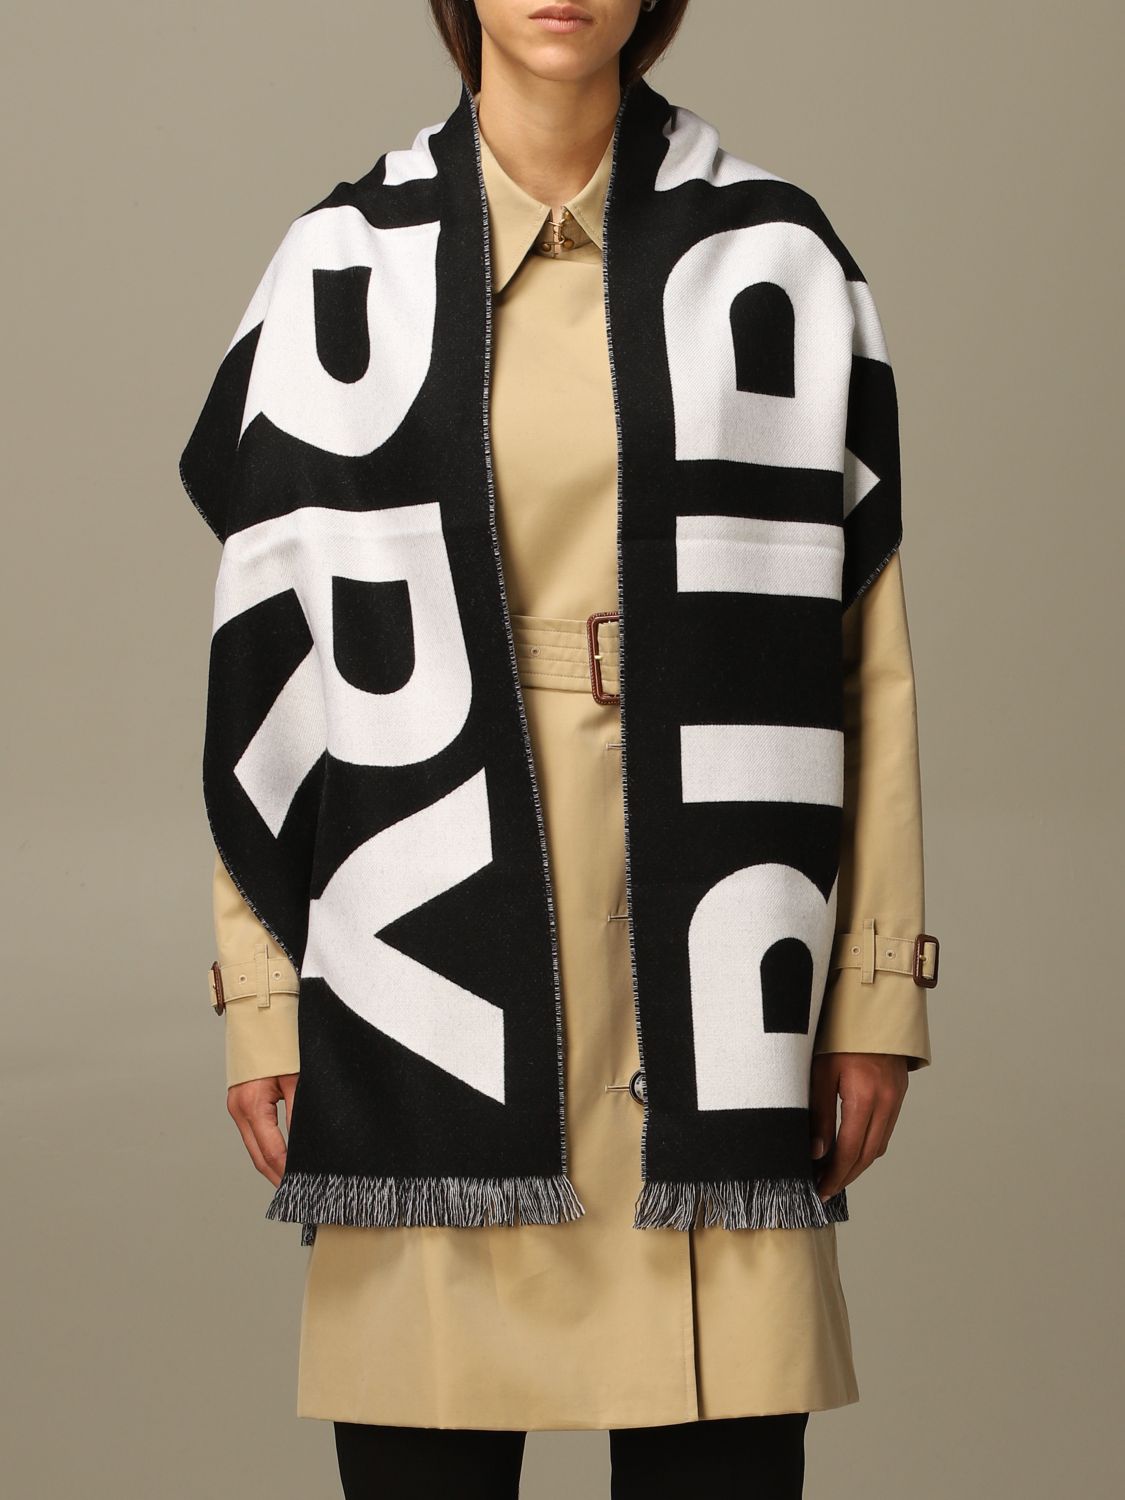 BURBERRY: wool with big logo - Black | Burberry scarf 8025557 online at GIGLIO.COM